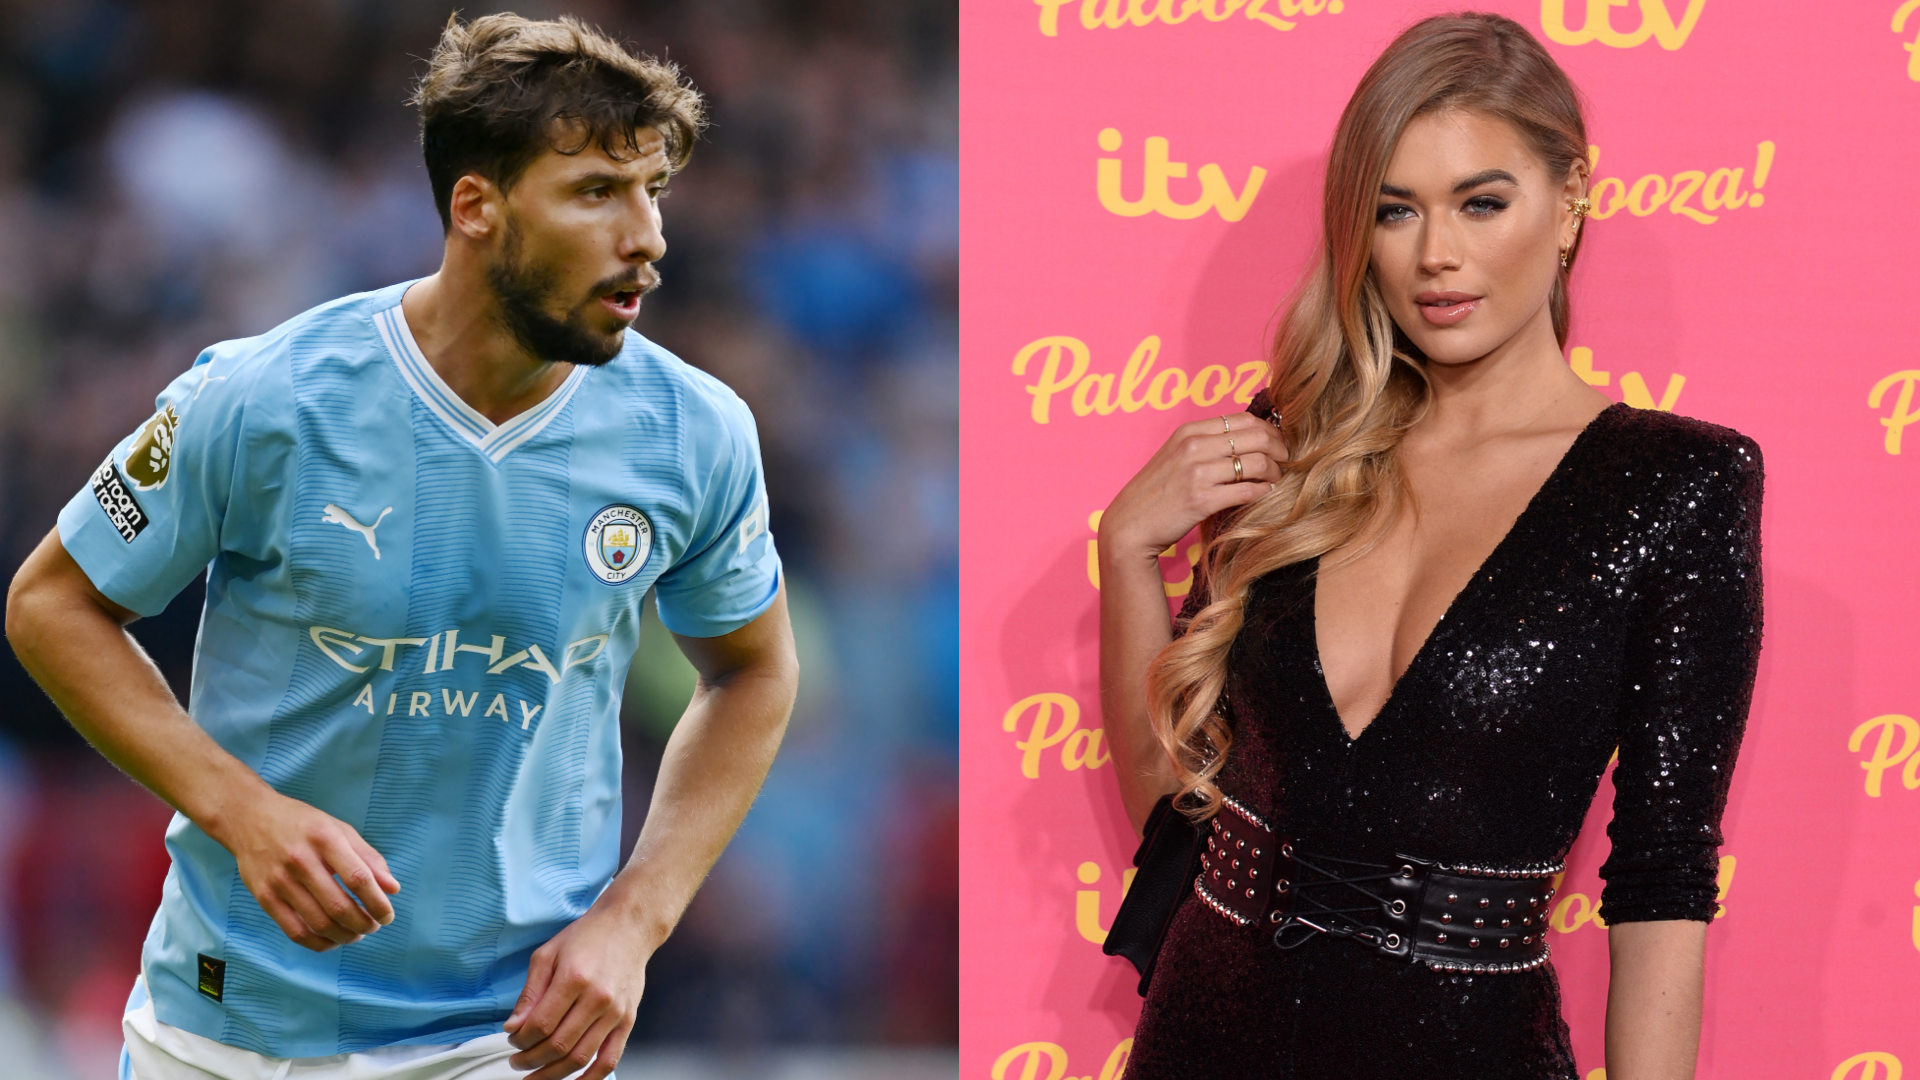 Man City star Ruben Dias’ ex Arabella Chi moves on to another Premier League footballer - just a month after Love Island All Stars exit